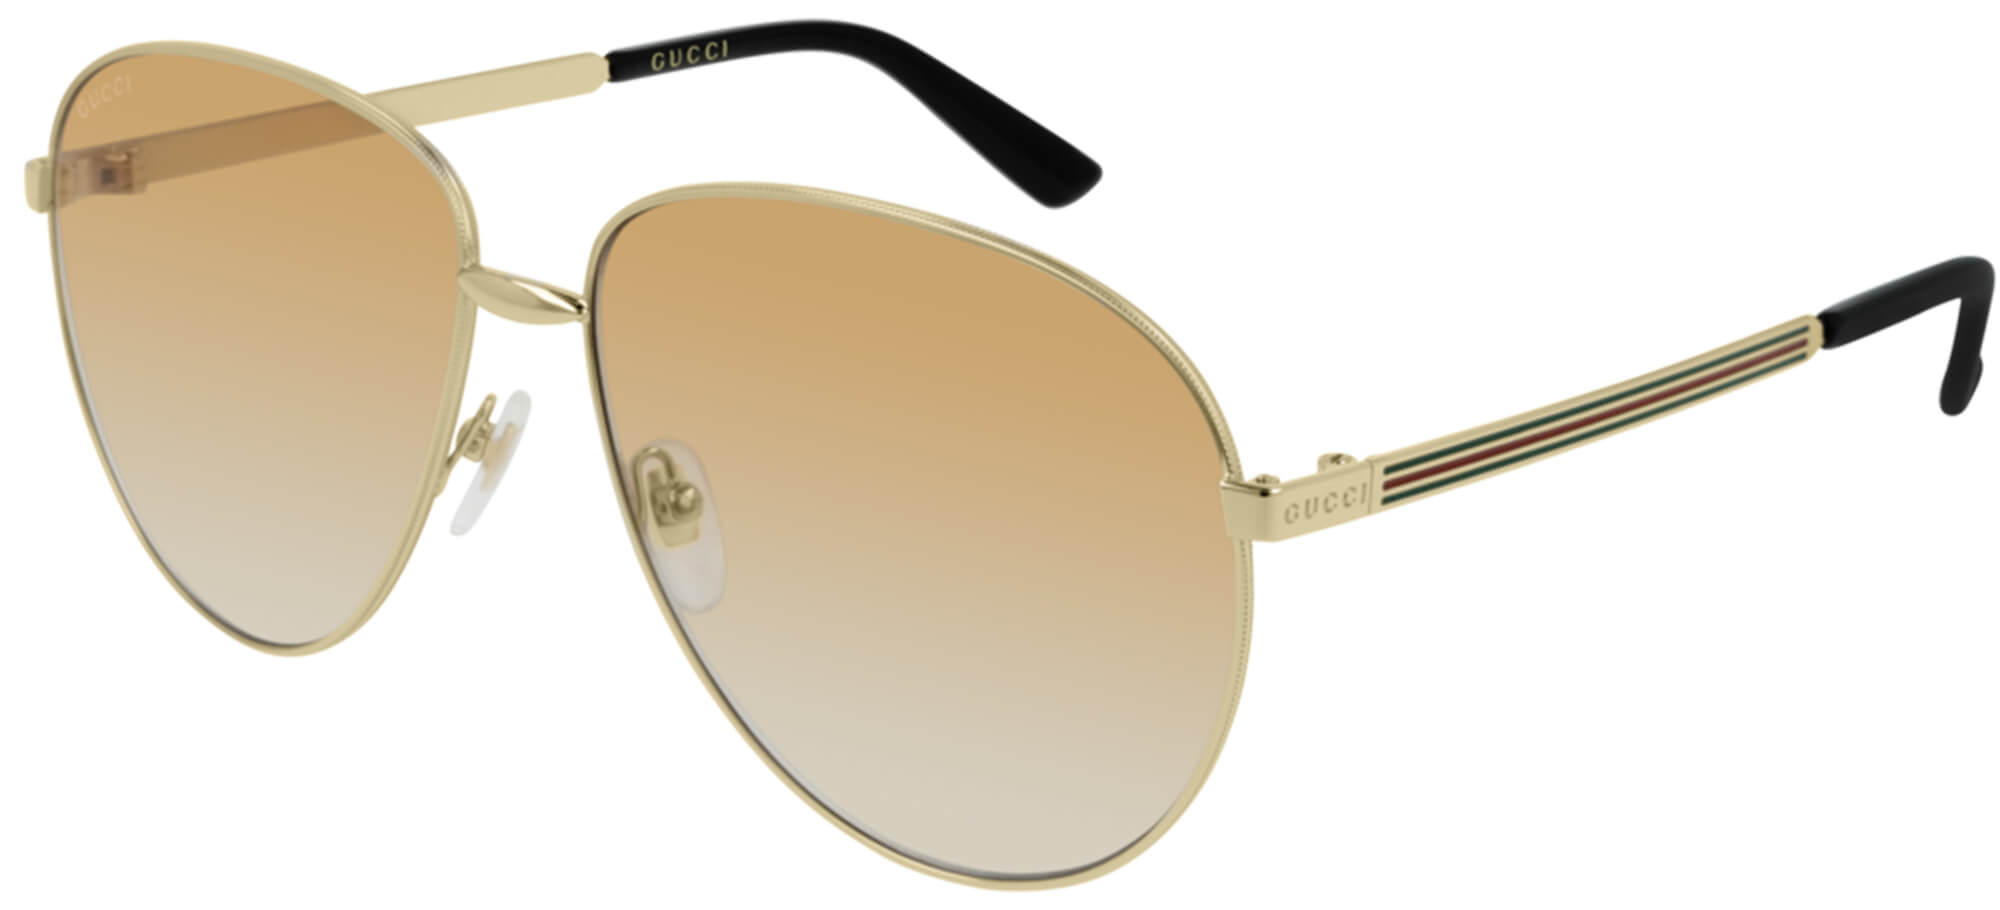 GucciGG0138SPale Gold/light Brown Shaded (007 W)